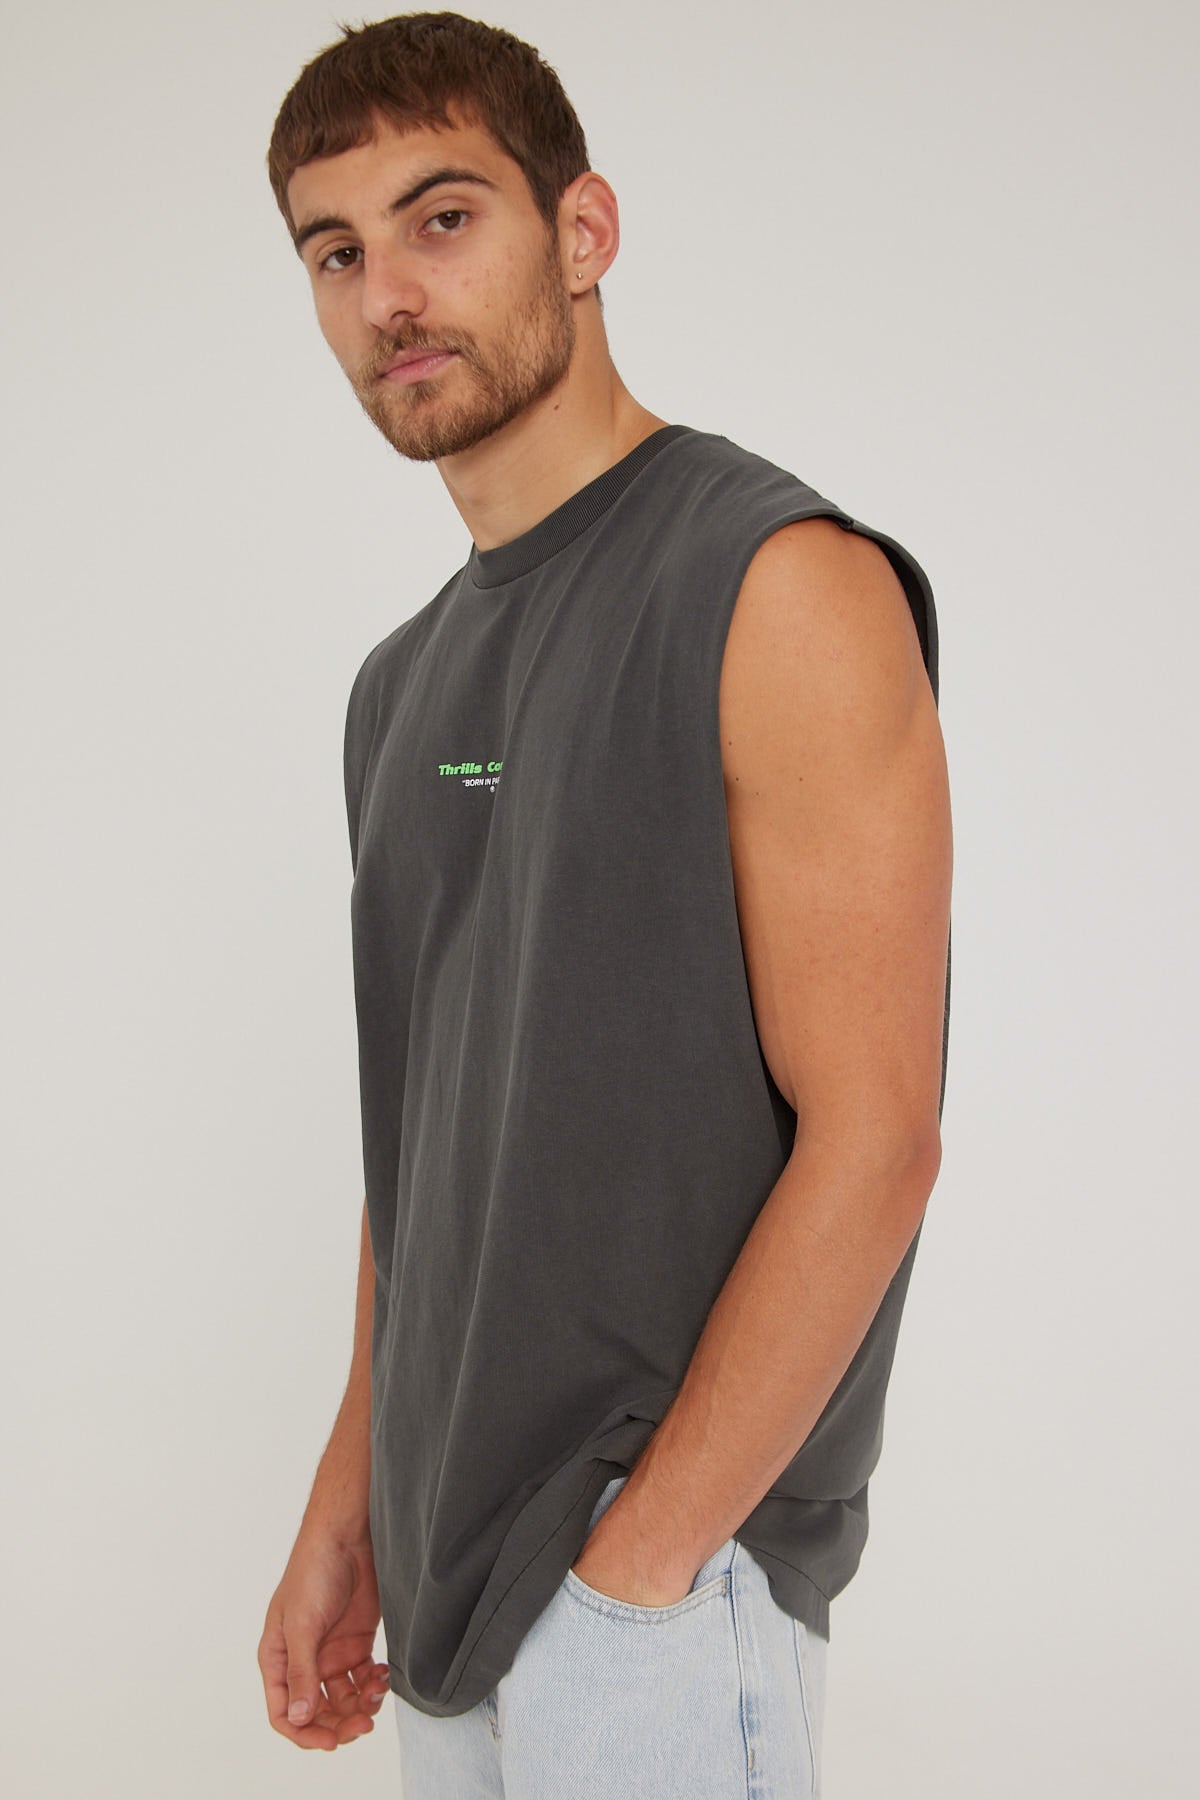 Thrills Energy Merch Fit Muscle Tee Merch Black